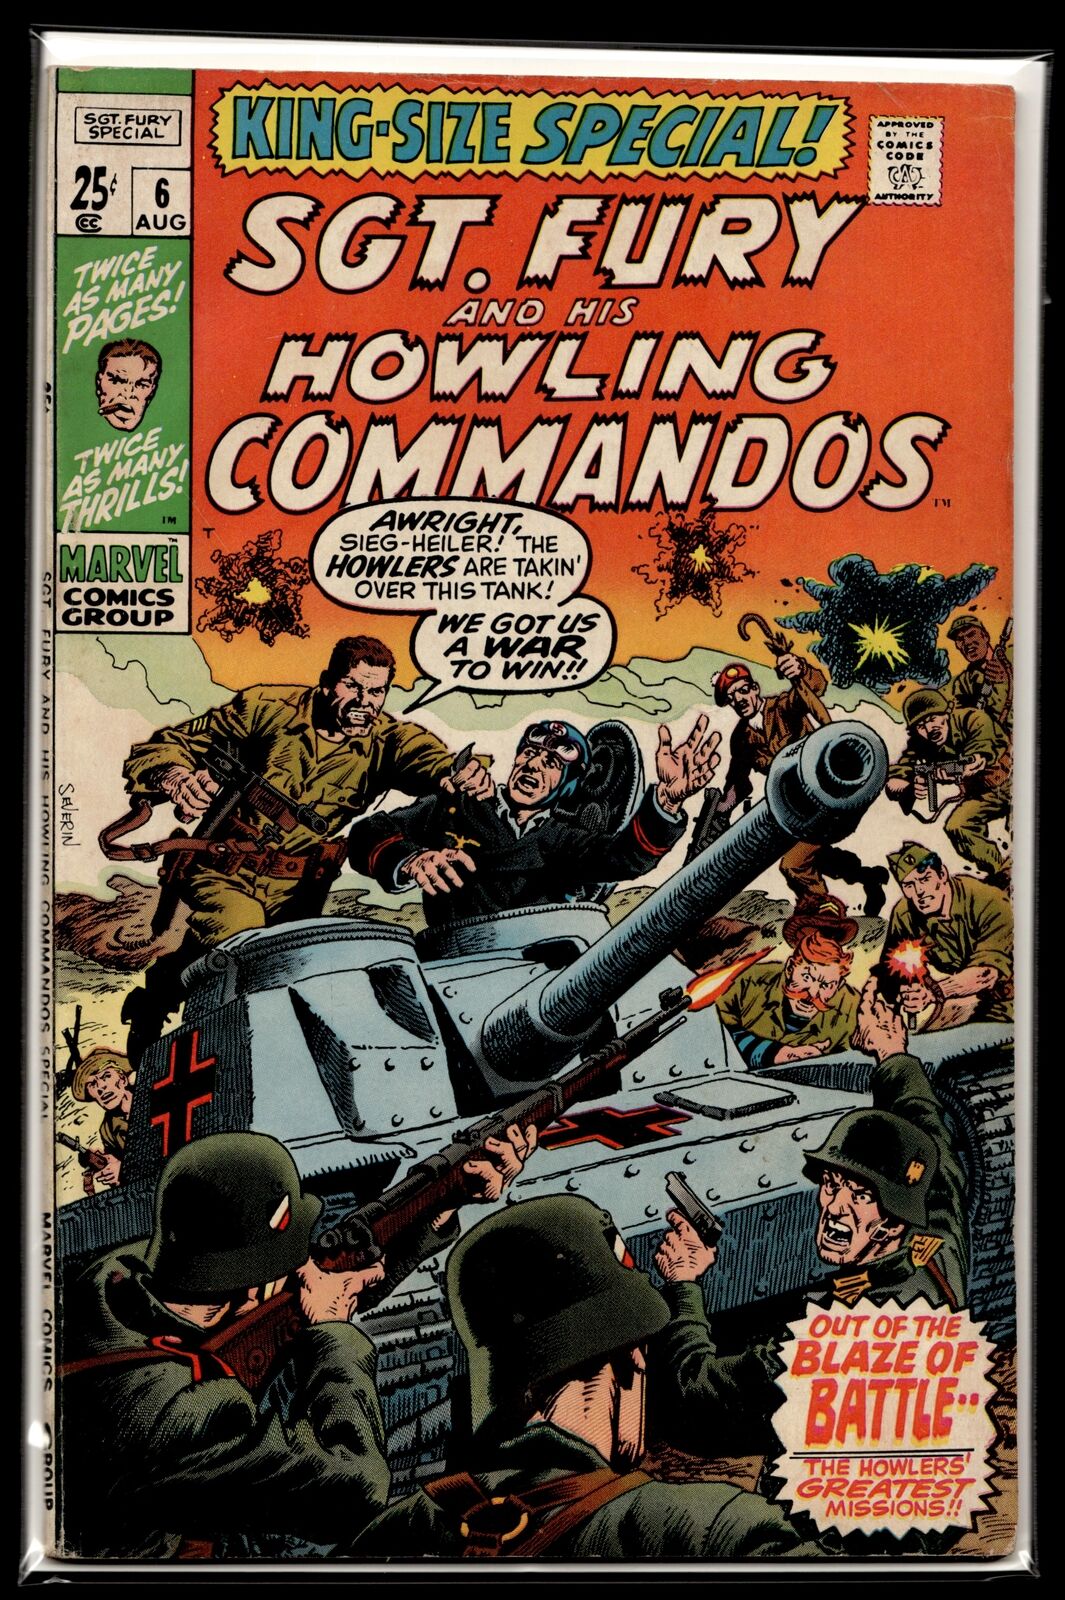 1970 Sgt. Fury and His Howling Commandos Annual #6 Marvel Comic